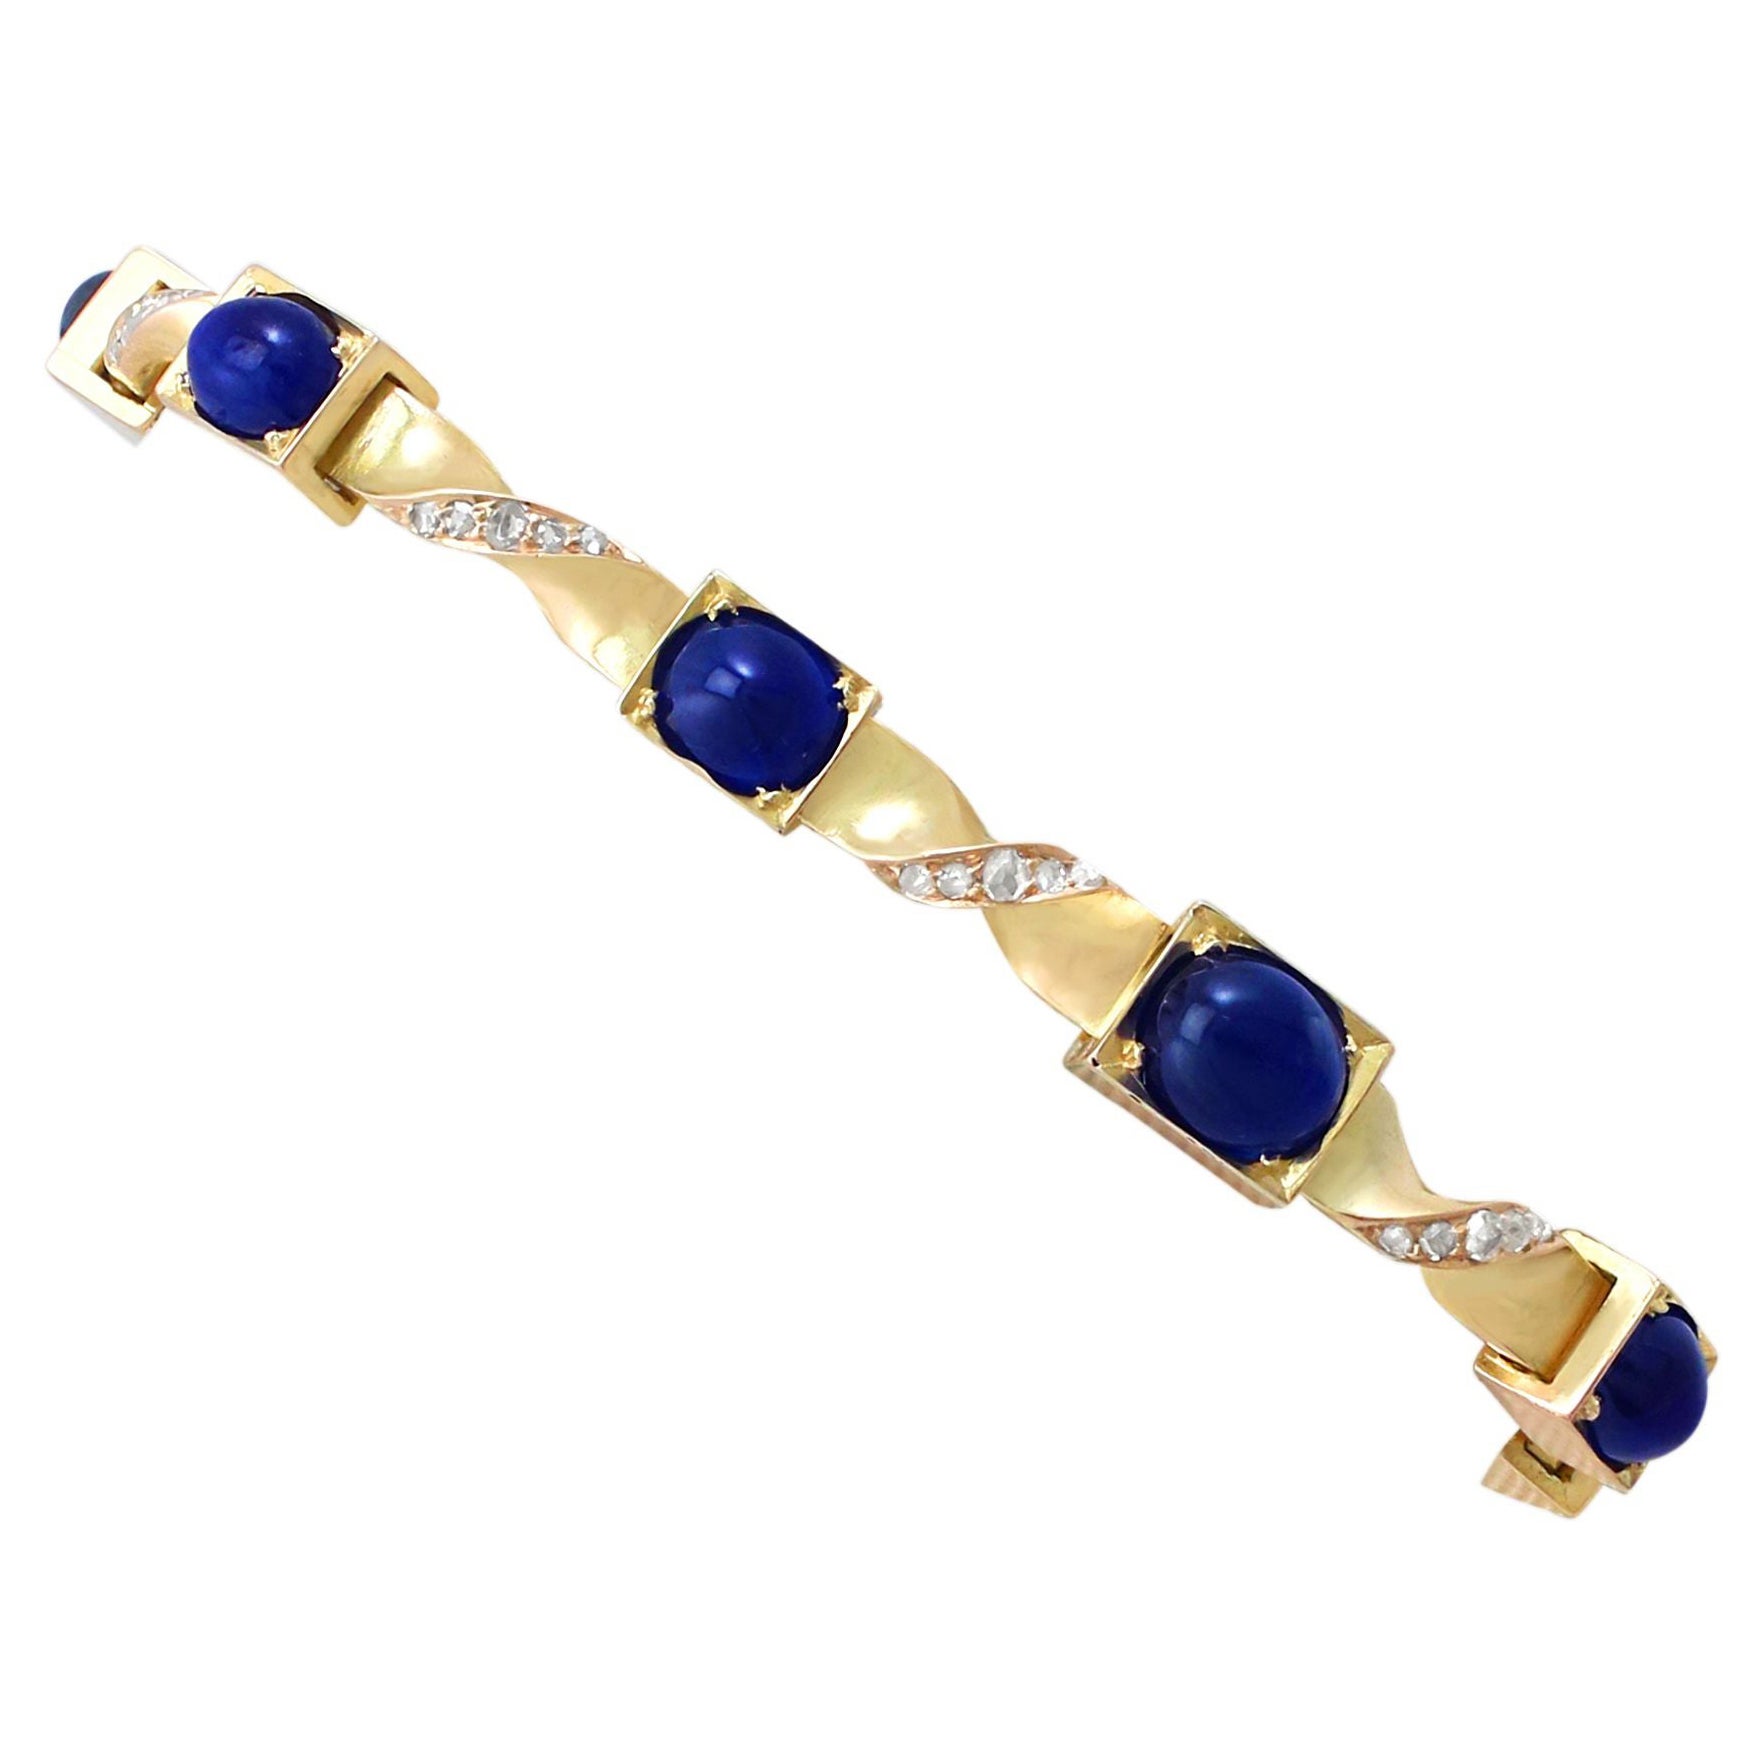 1880s Austrian Basaltic Sapphire and Diamond Yellow Gold Bracelet For Sale